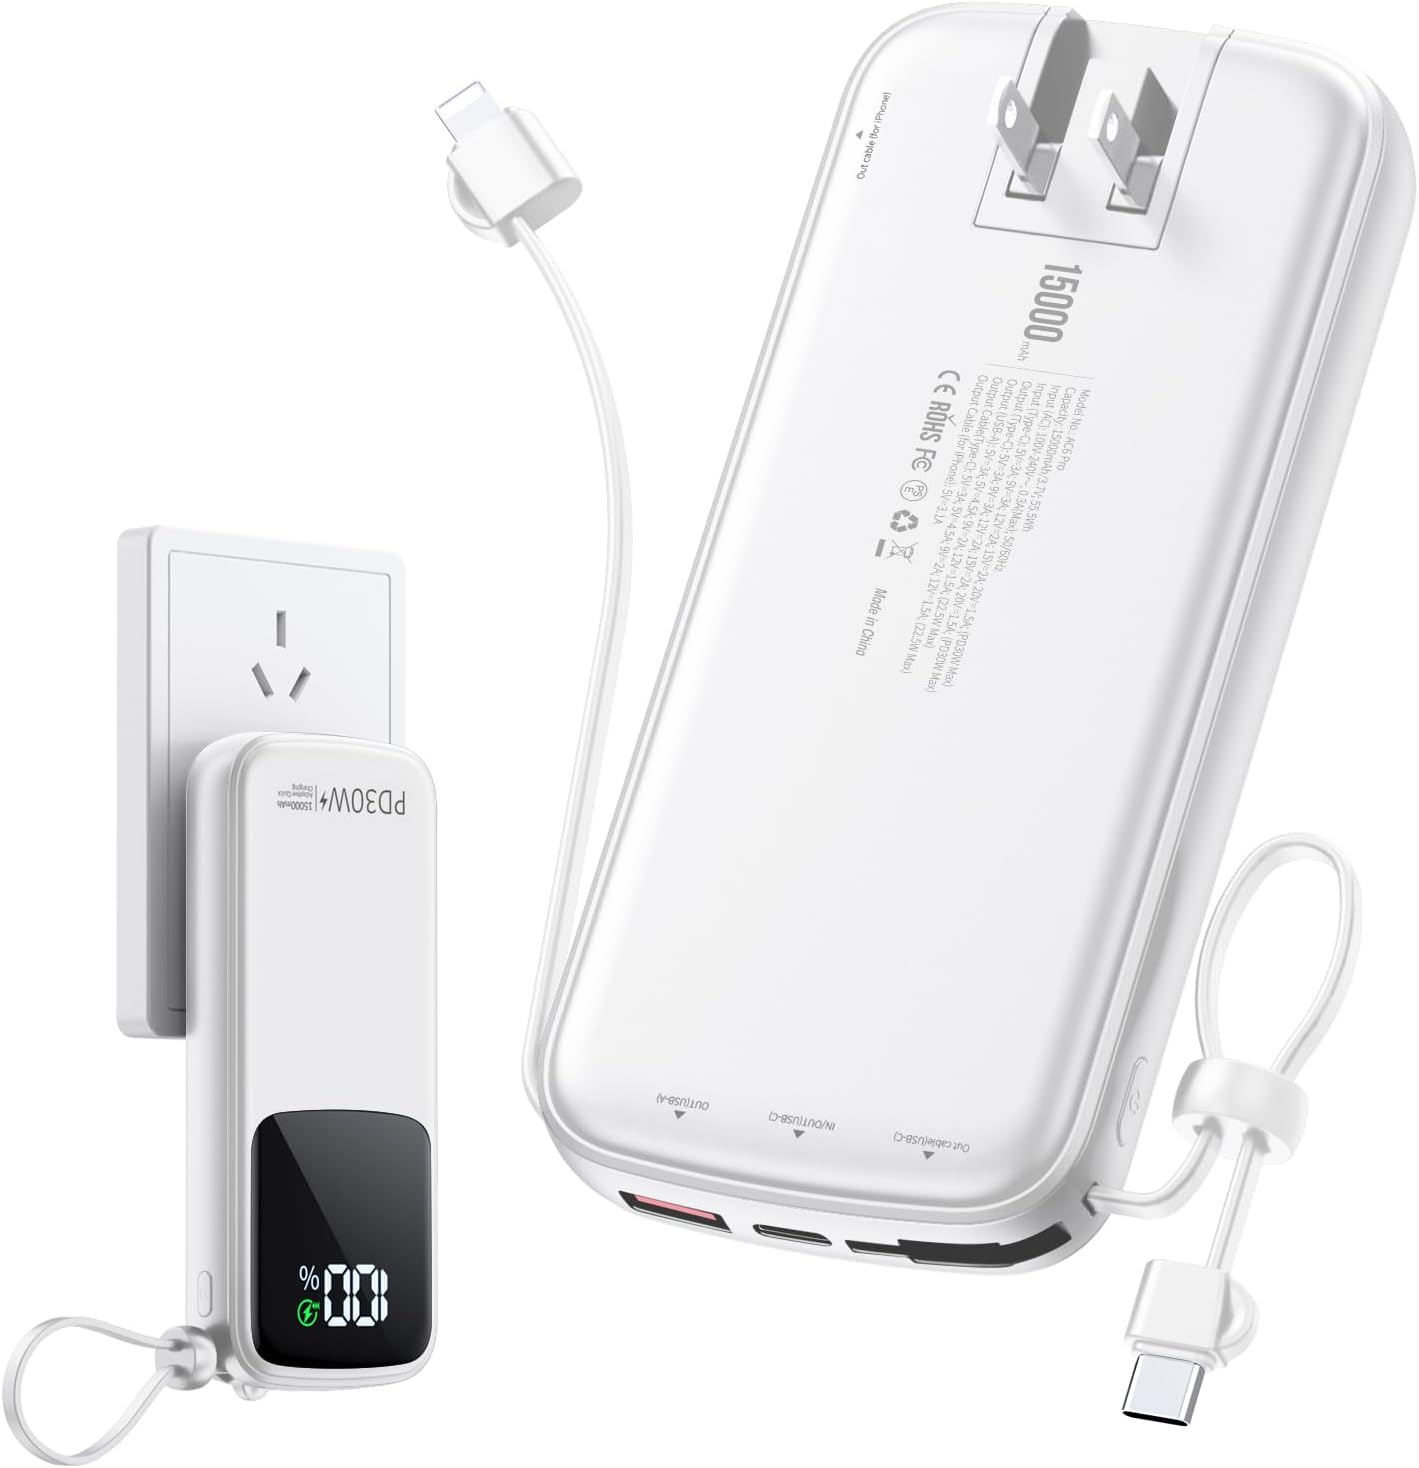 Portable Charger Power Bank, 15000mAh Portable Charger Fast Charging Lightweight, Built-in AC Wall Plug and 2 Output Cables with LED Display for iPhone Samsung iPad etc(White)